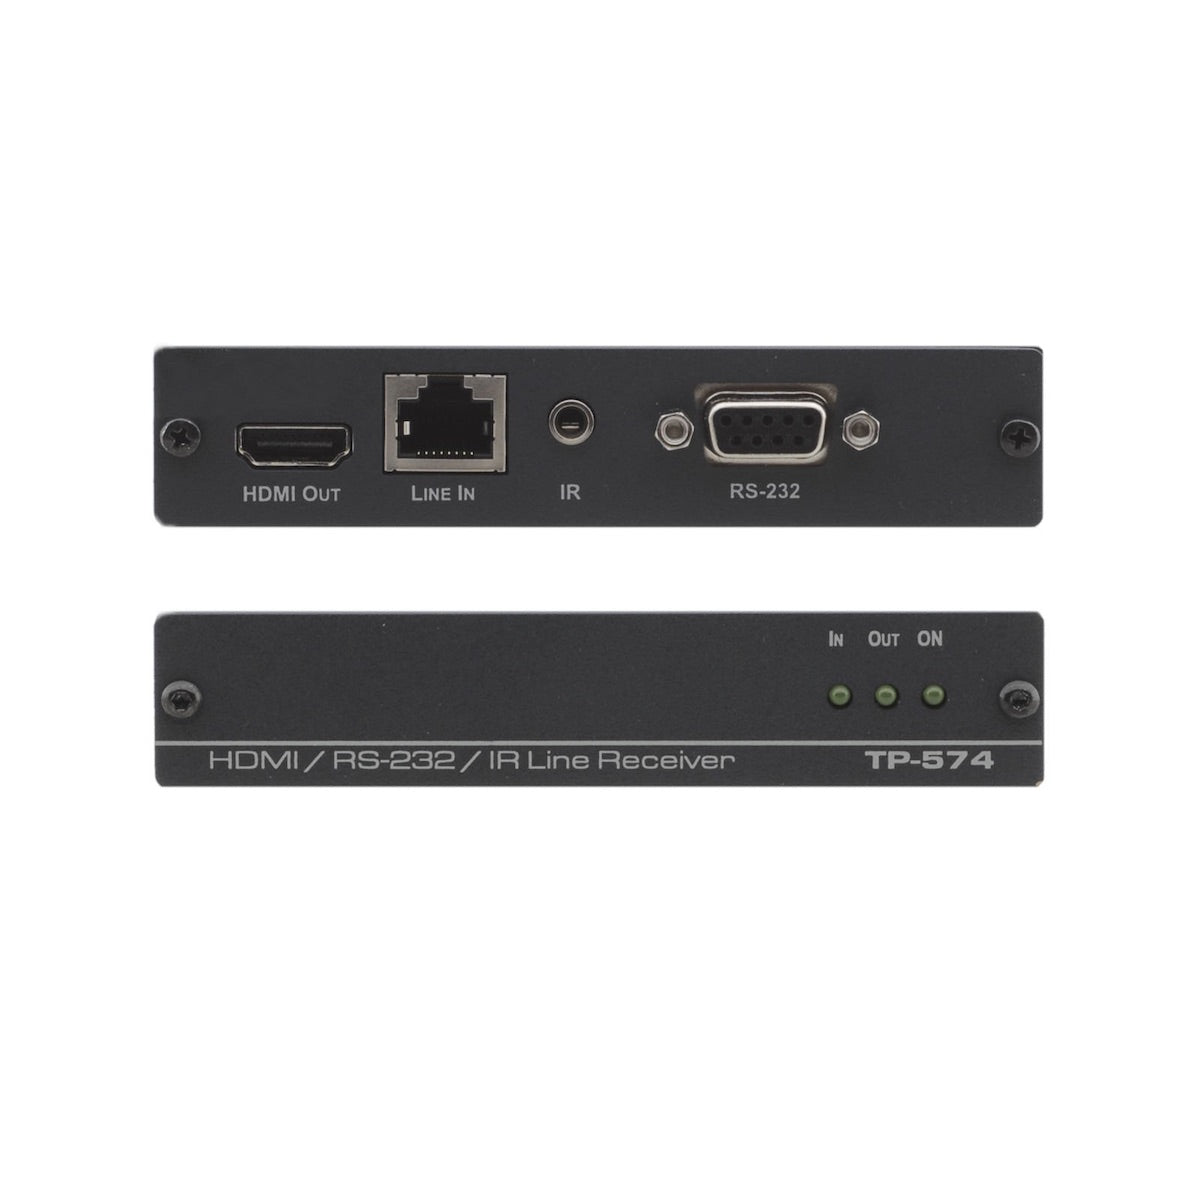 Kramer TP-574 - HDMI, RS-232 & IR over Twisted Pair Receiver, front and rear views